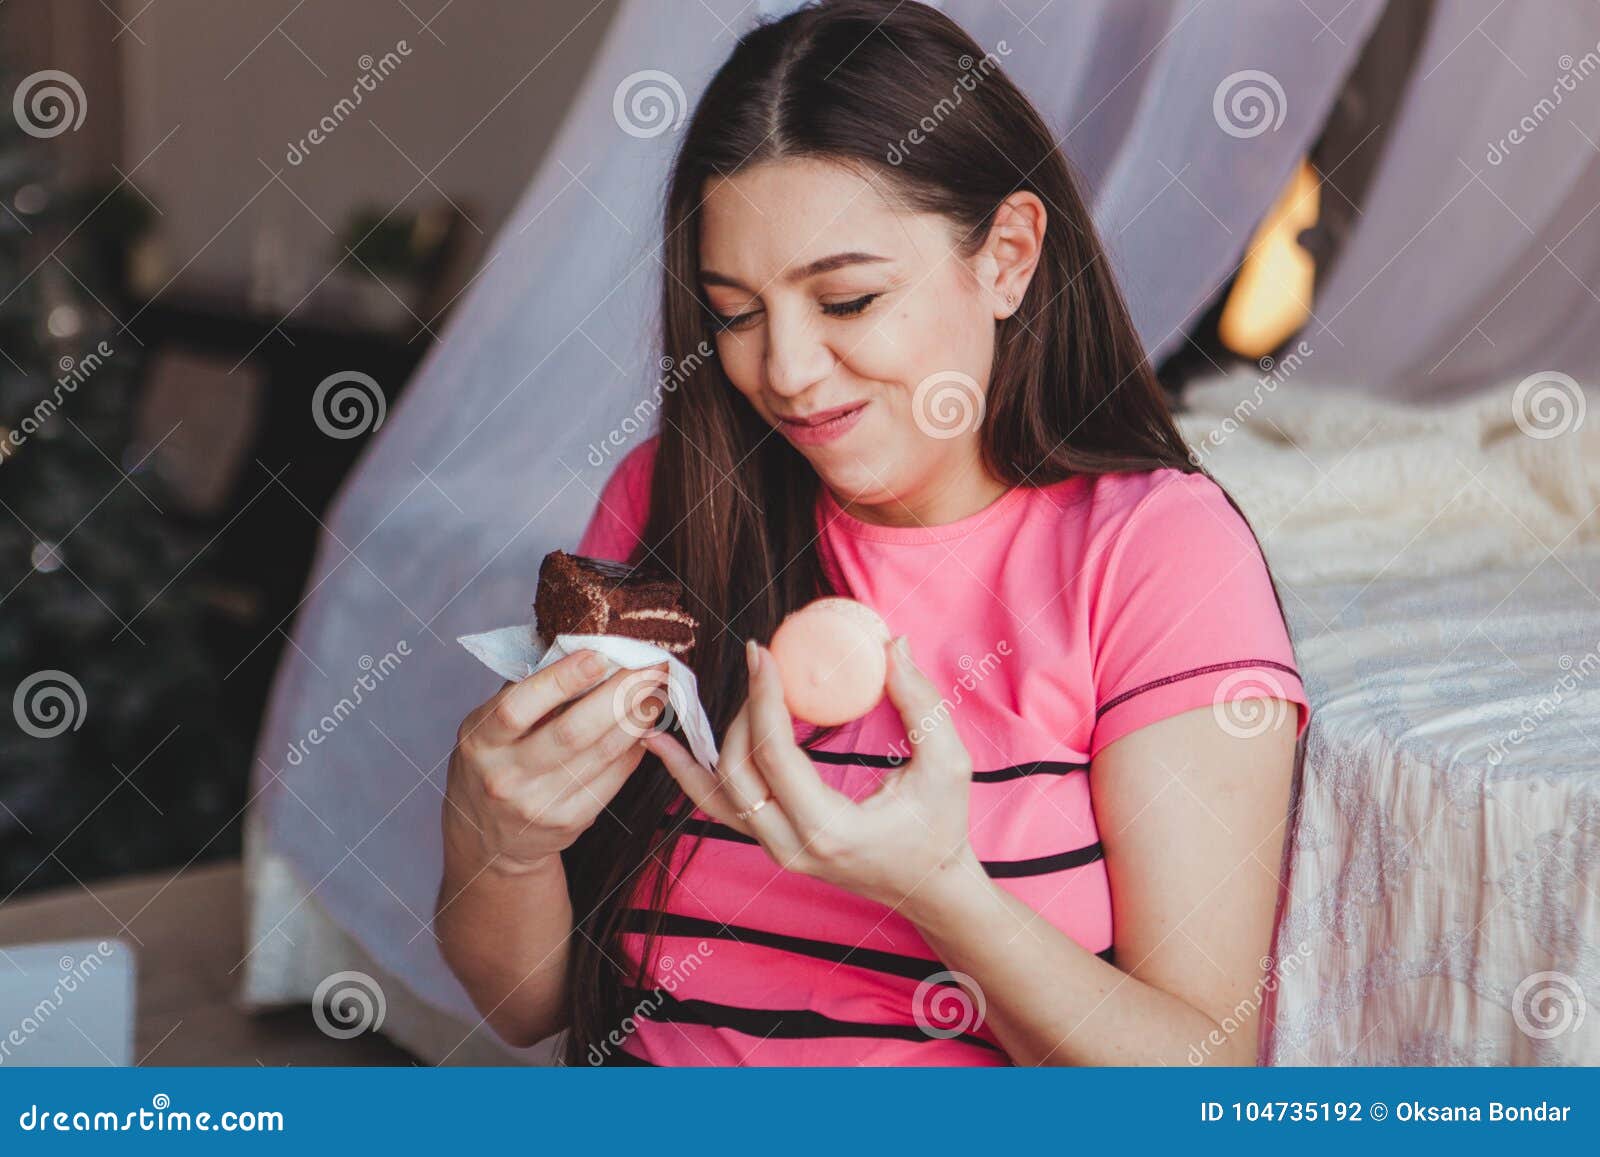 Girl Eating Tasty Browny Cake With In Bedroom. Sweet